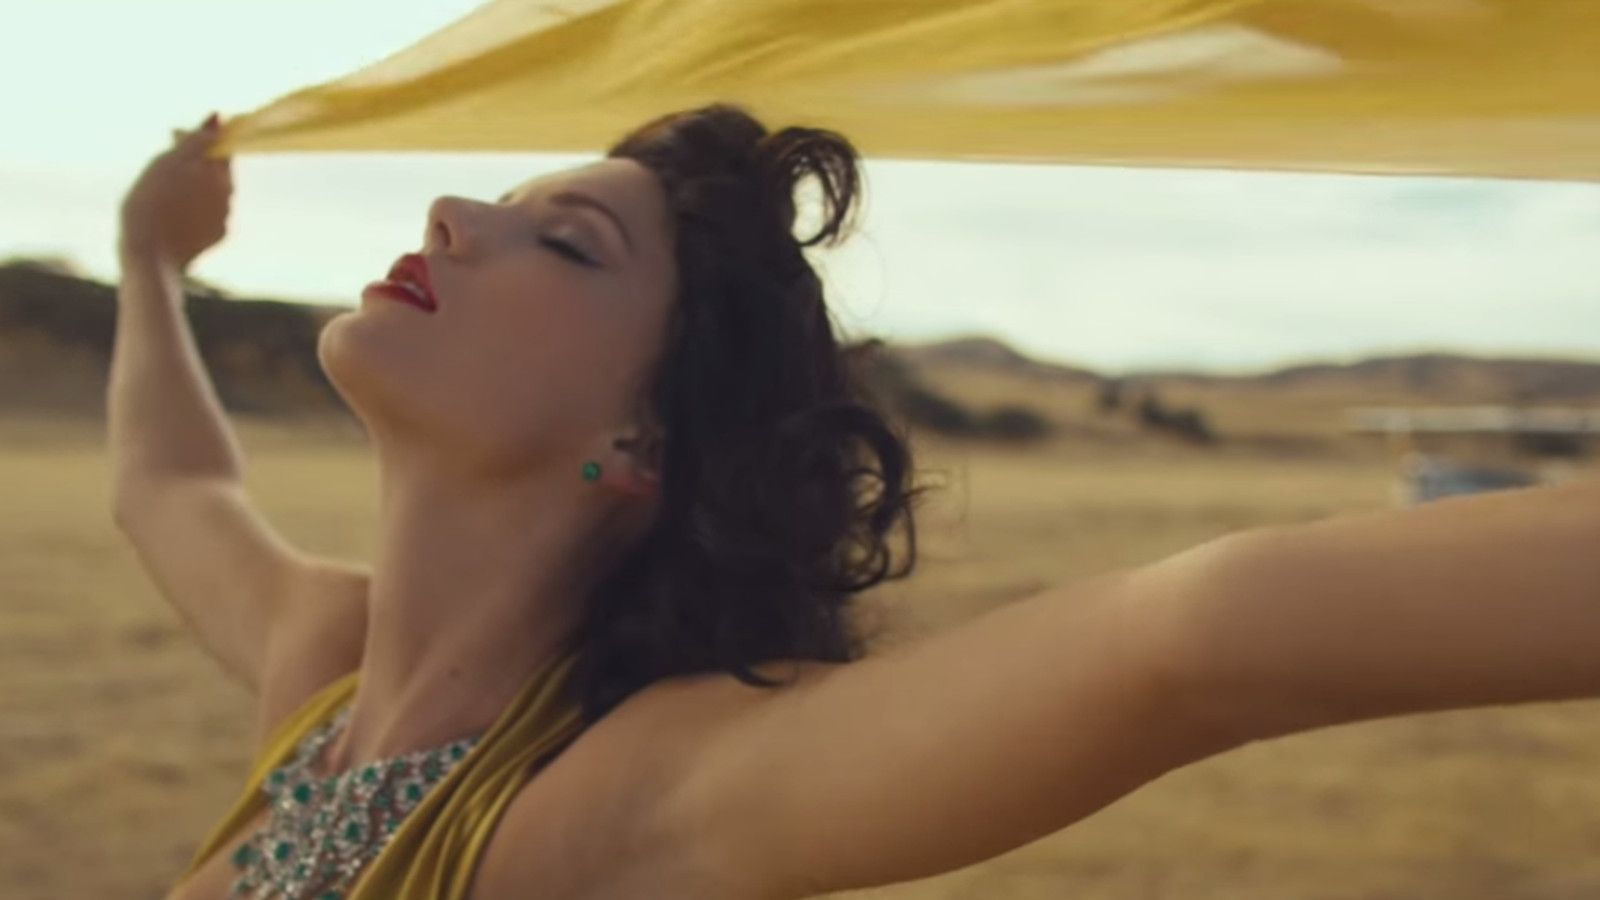 Taylor Swift hangs out with a giraffe in the video for Wildest Dreams